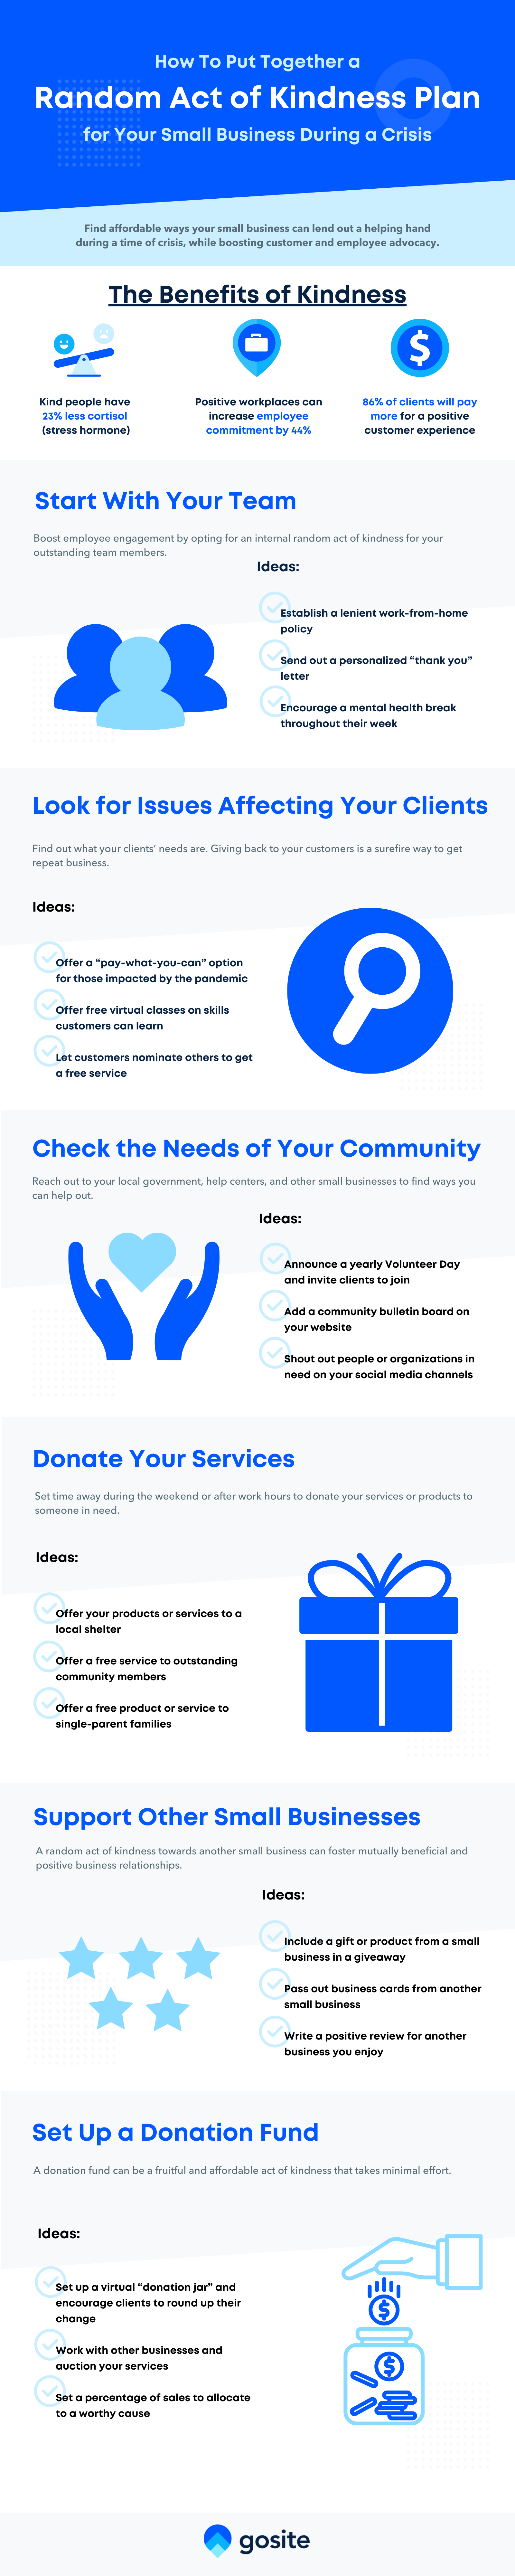 random acts of kindness infographic